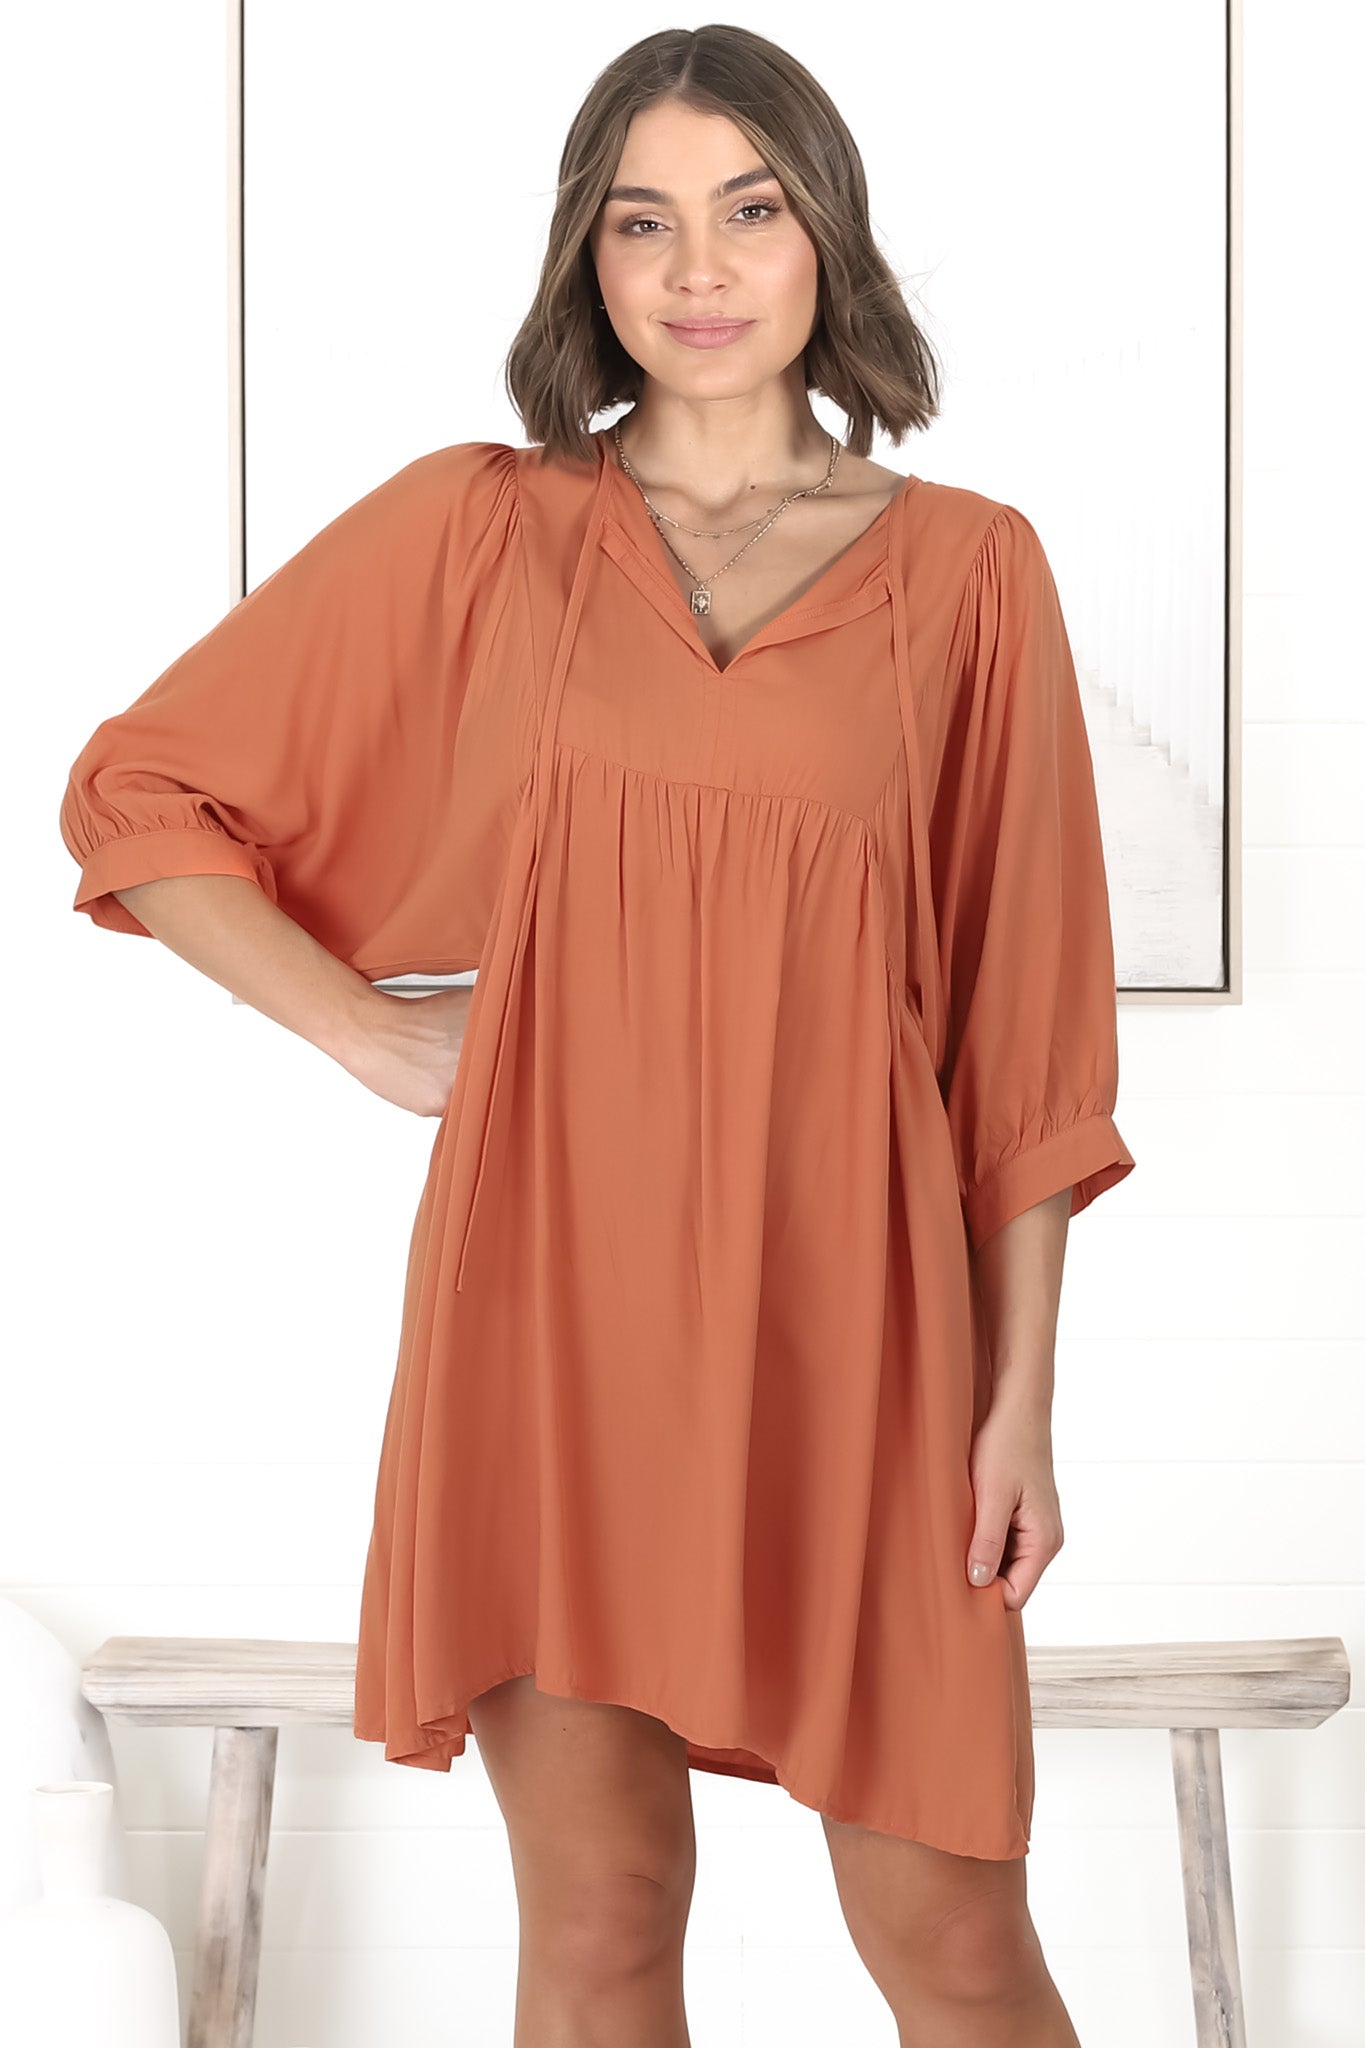 Mariah Mini Dress - V Neck Smock Dress with Batwing Sleeves in Tangerine